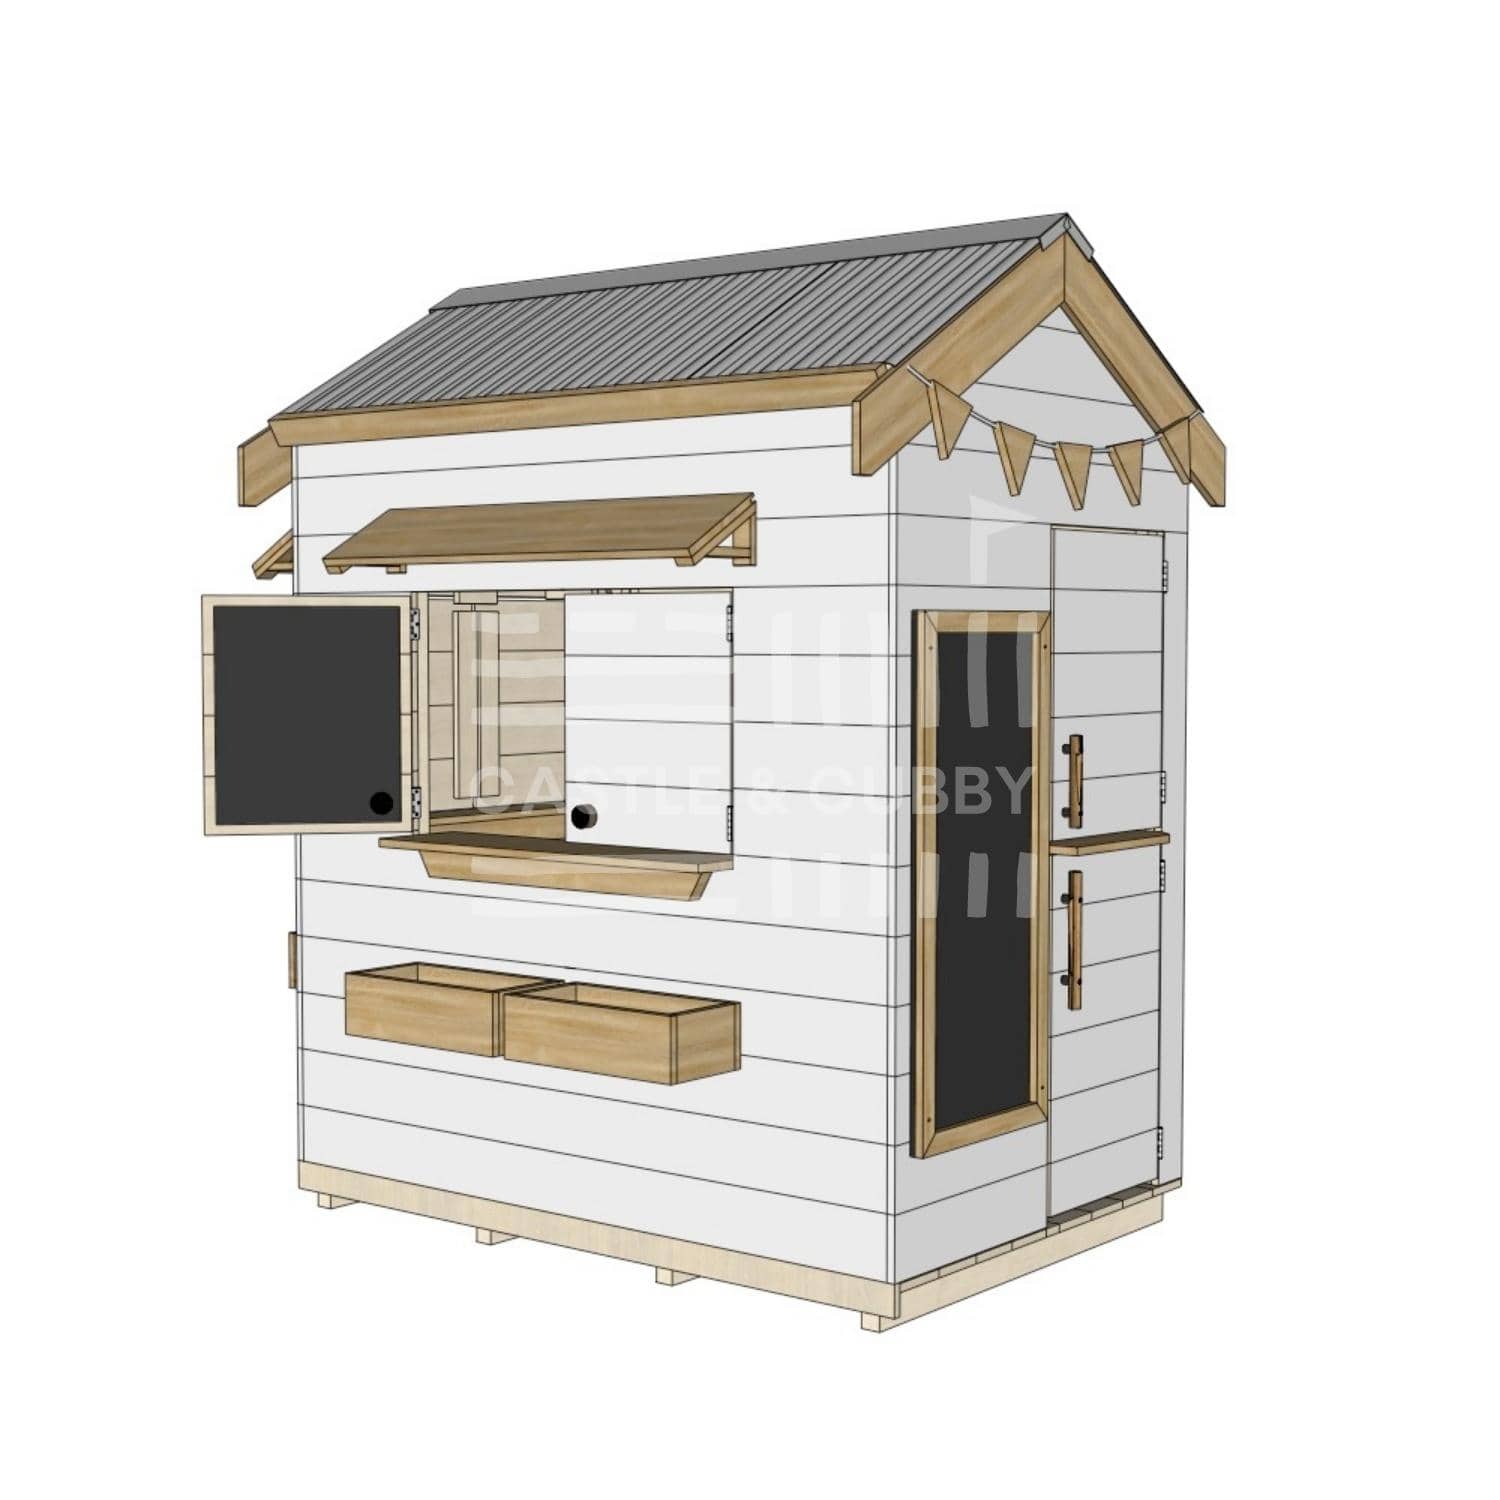 Pitched roof extra height painted wooden cubby house residential and family homes little rectangle accessories